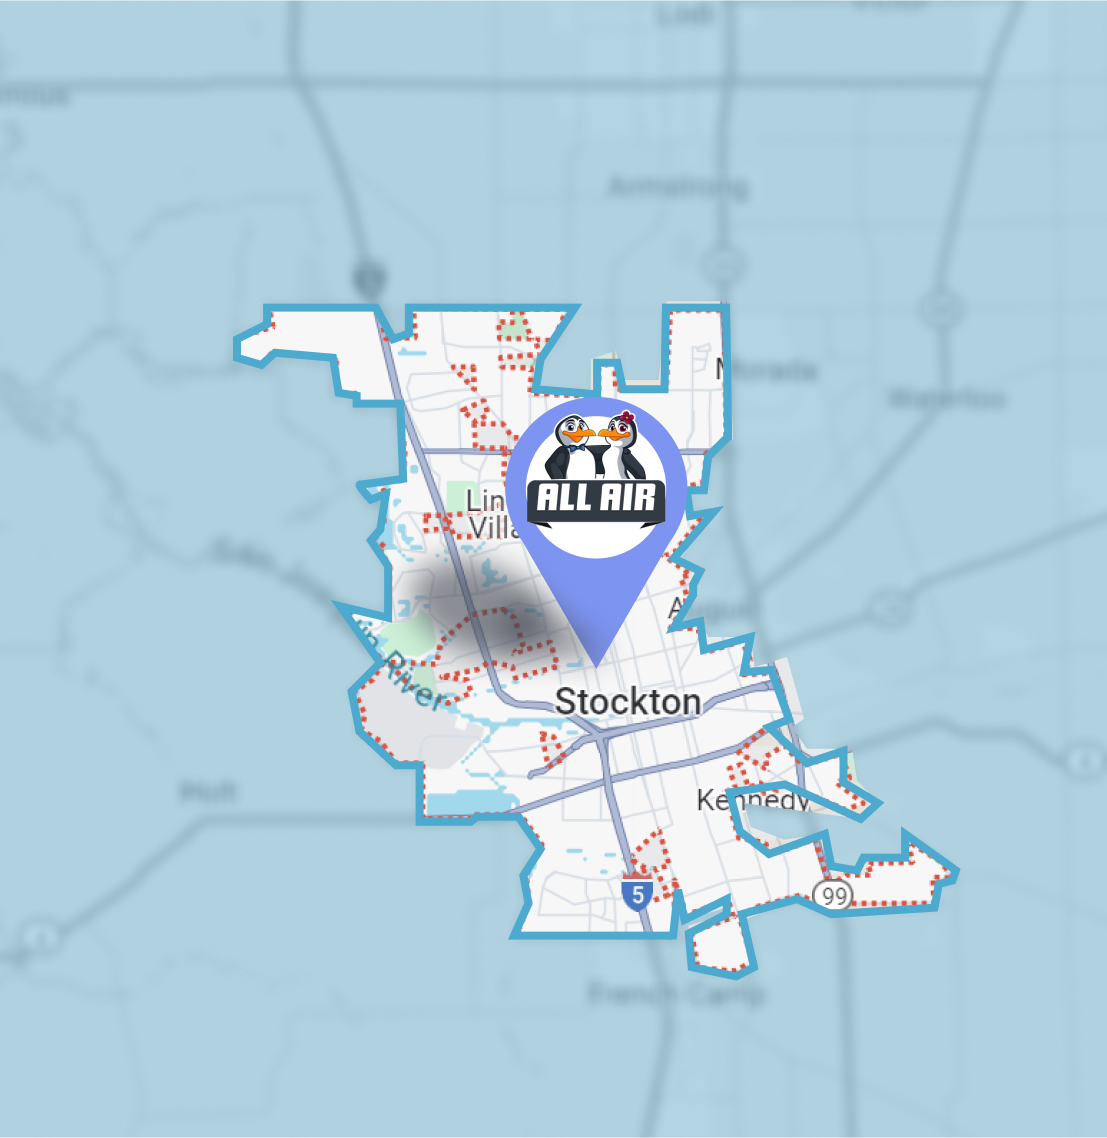 Map highlighting Stockton, CA, with a prominent All Air Heating and Air Conditioning logo marker pinpointing the location.